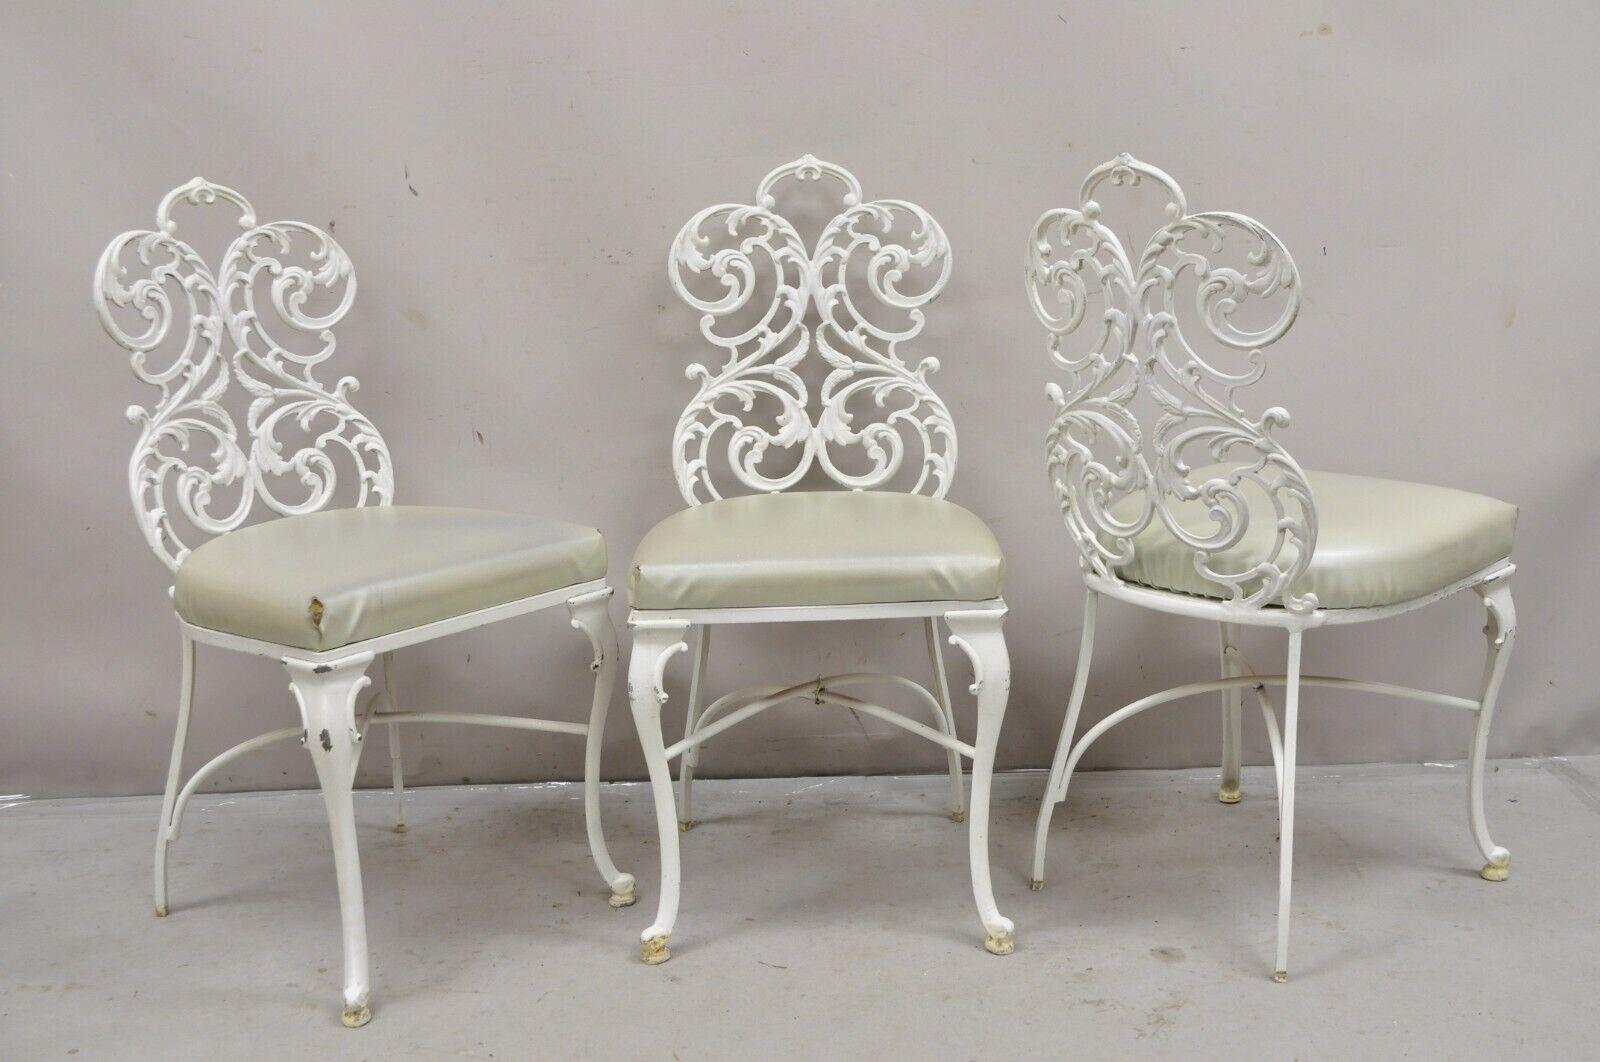 Vintage Art Nouveau Style Cast Aluminum Sunroom Patio Dining Chairs - Set of 3.  In Good Condition For Sale In Philadelphia, PA